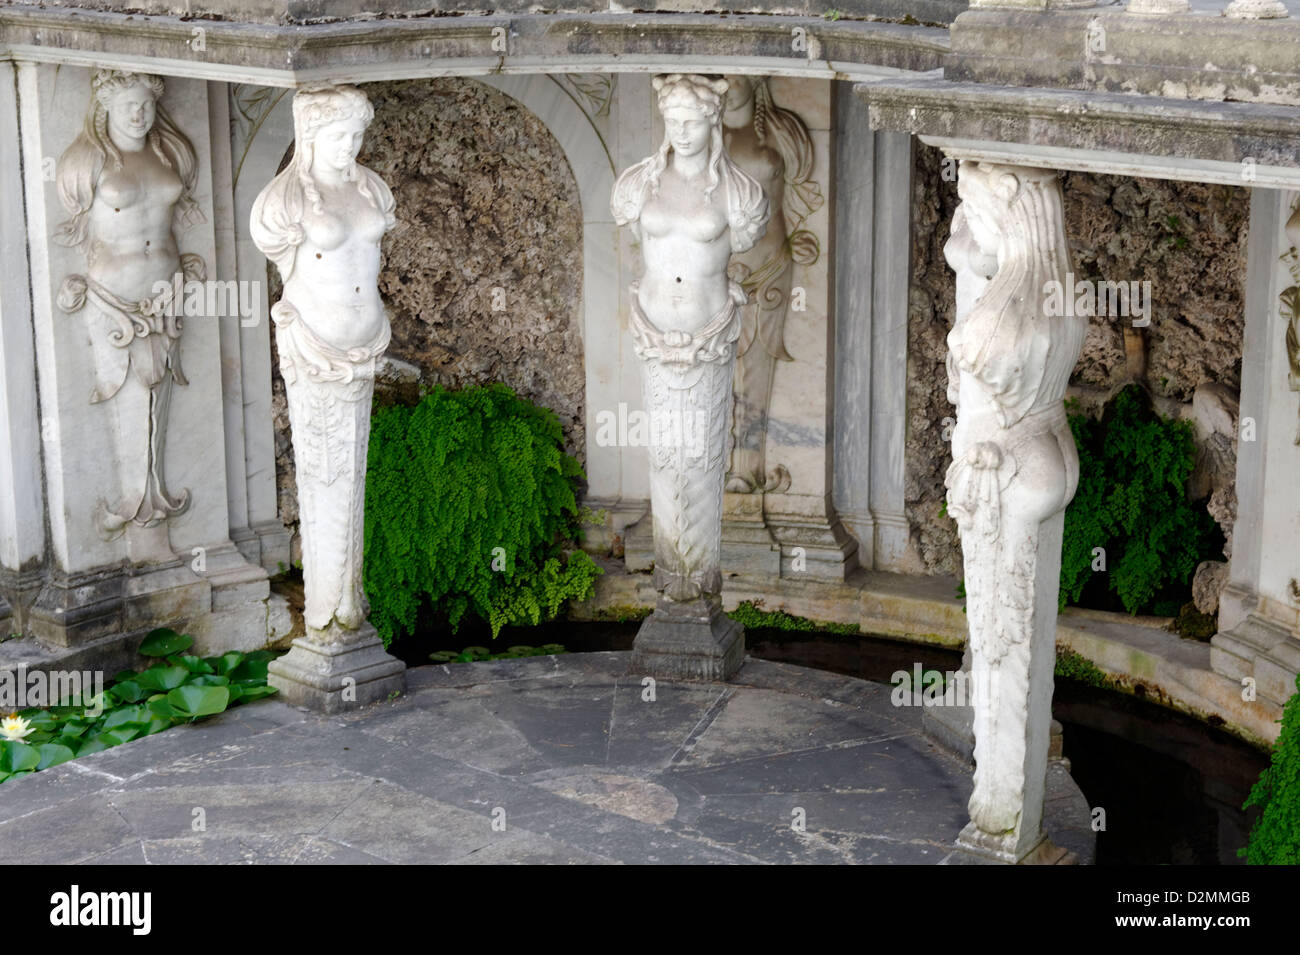 Villa Giulia. Rome. Italy. View of caryatids sculptures supporting the portico loggia on the lower level of the Nymphaeum. Stock Photo